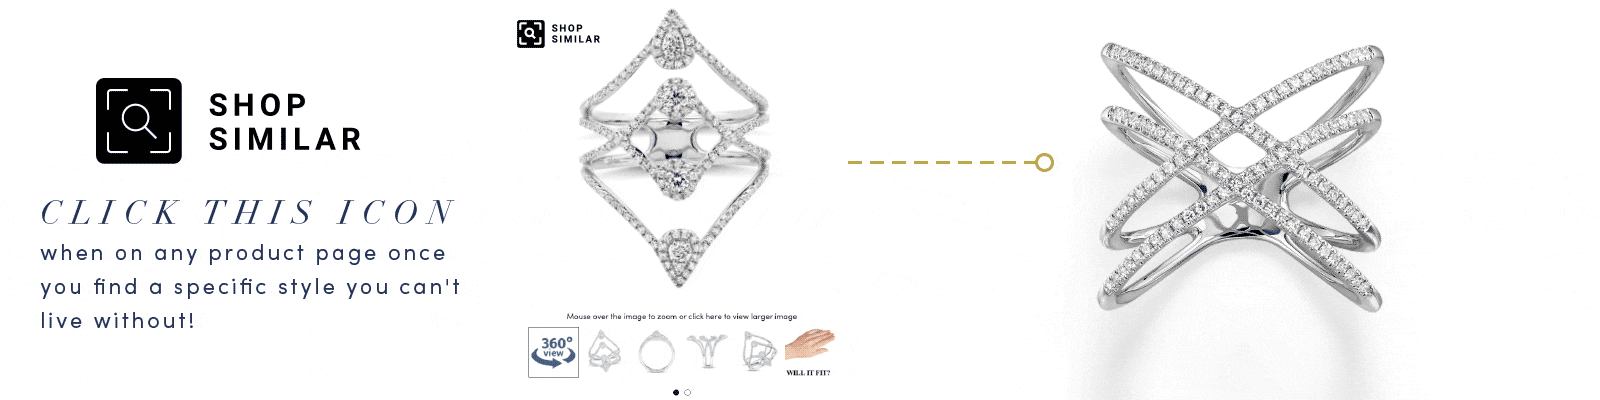 Gif that shows how the Visual Search tool allows guests to upload images of jewelry they like and how easy it is to find similar looks.